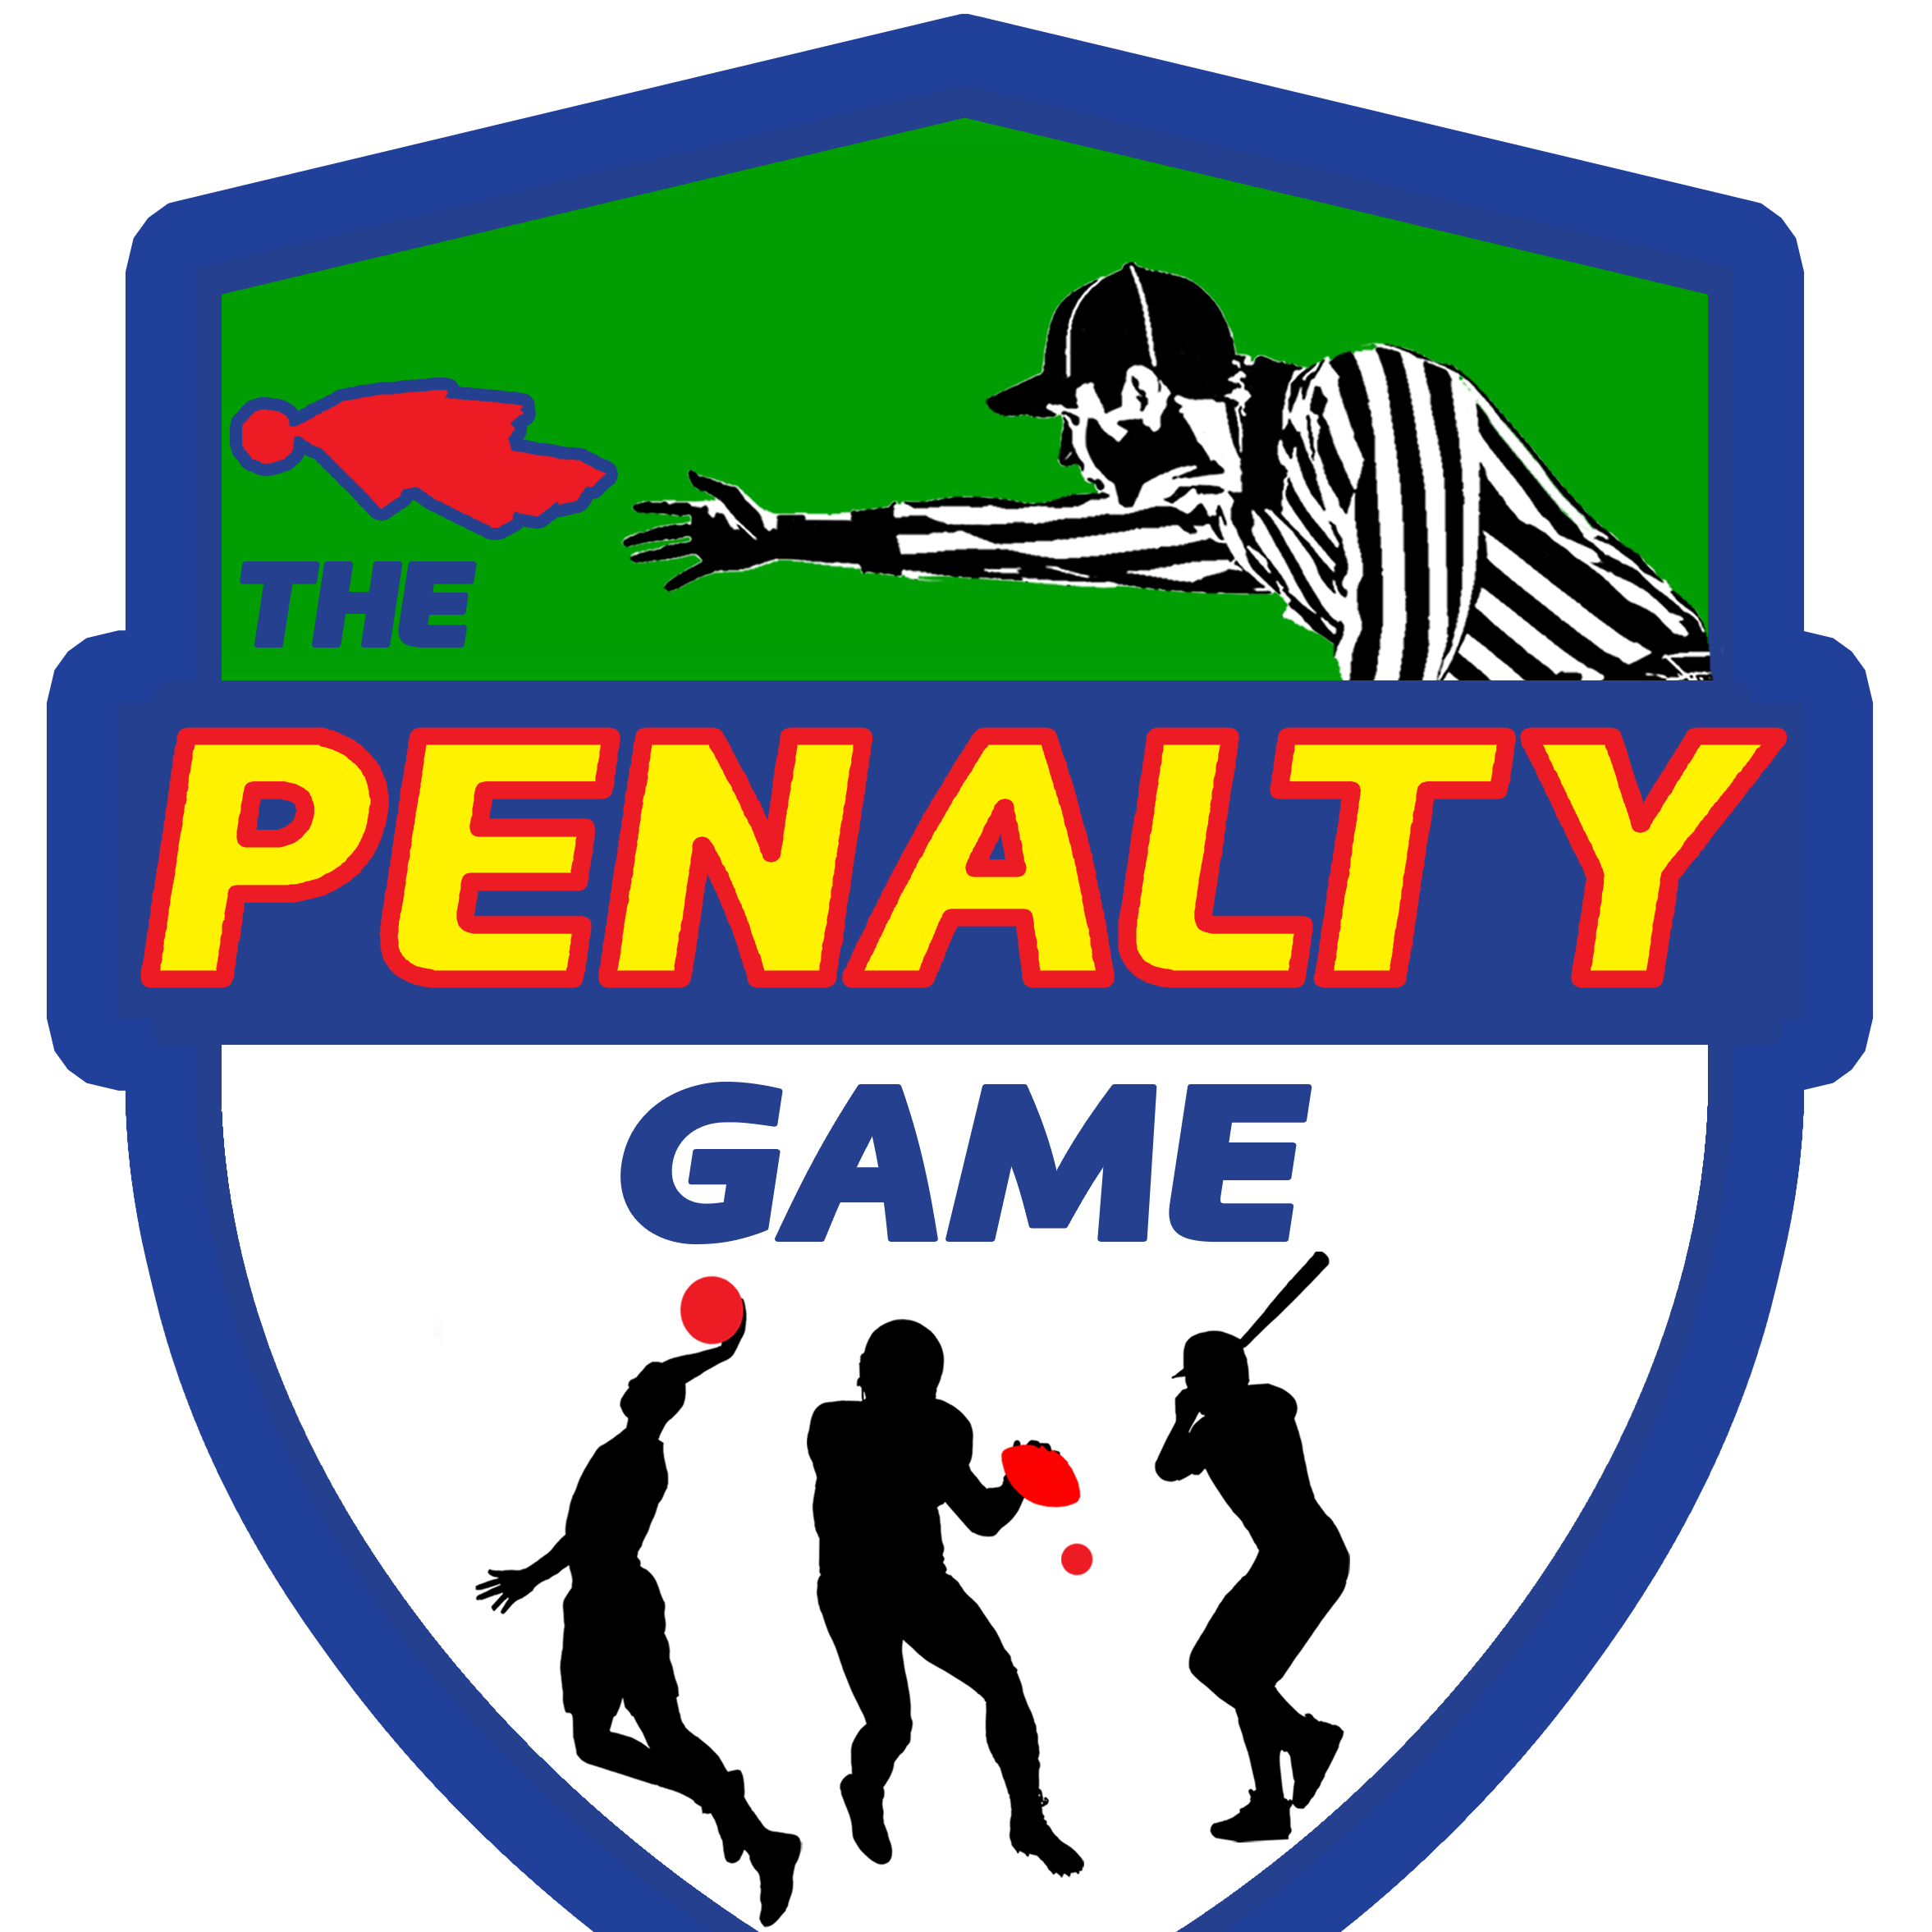 The Penalty Game